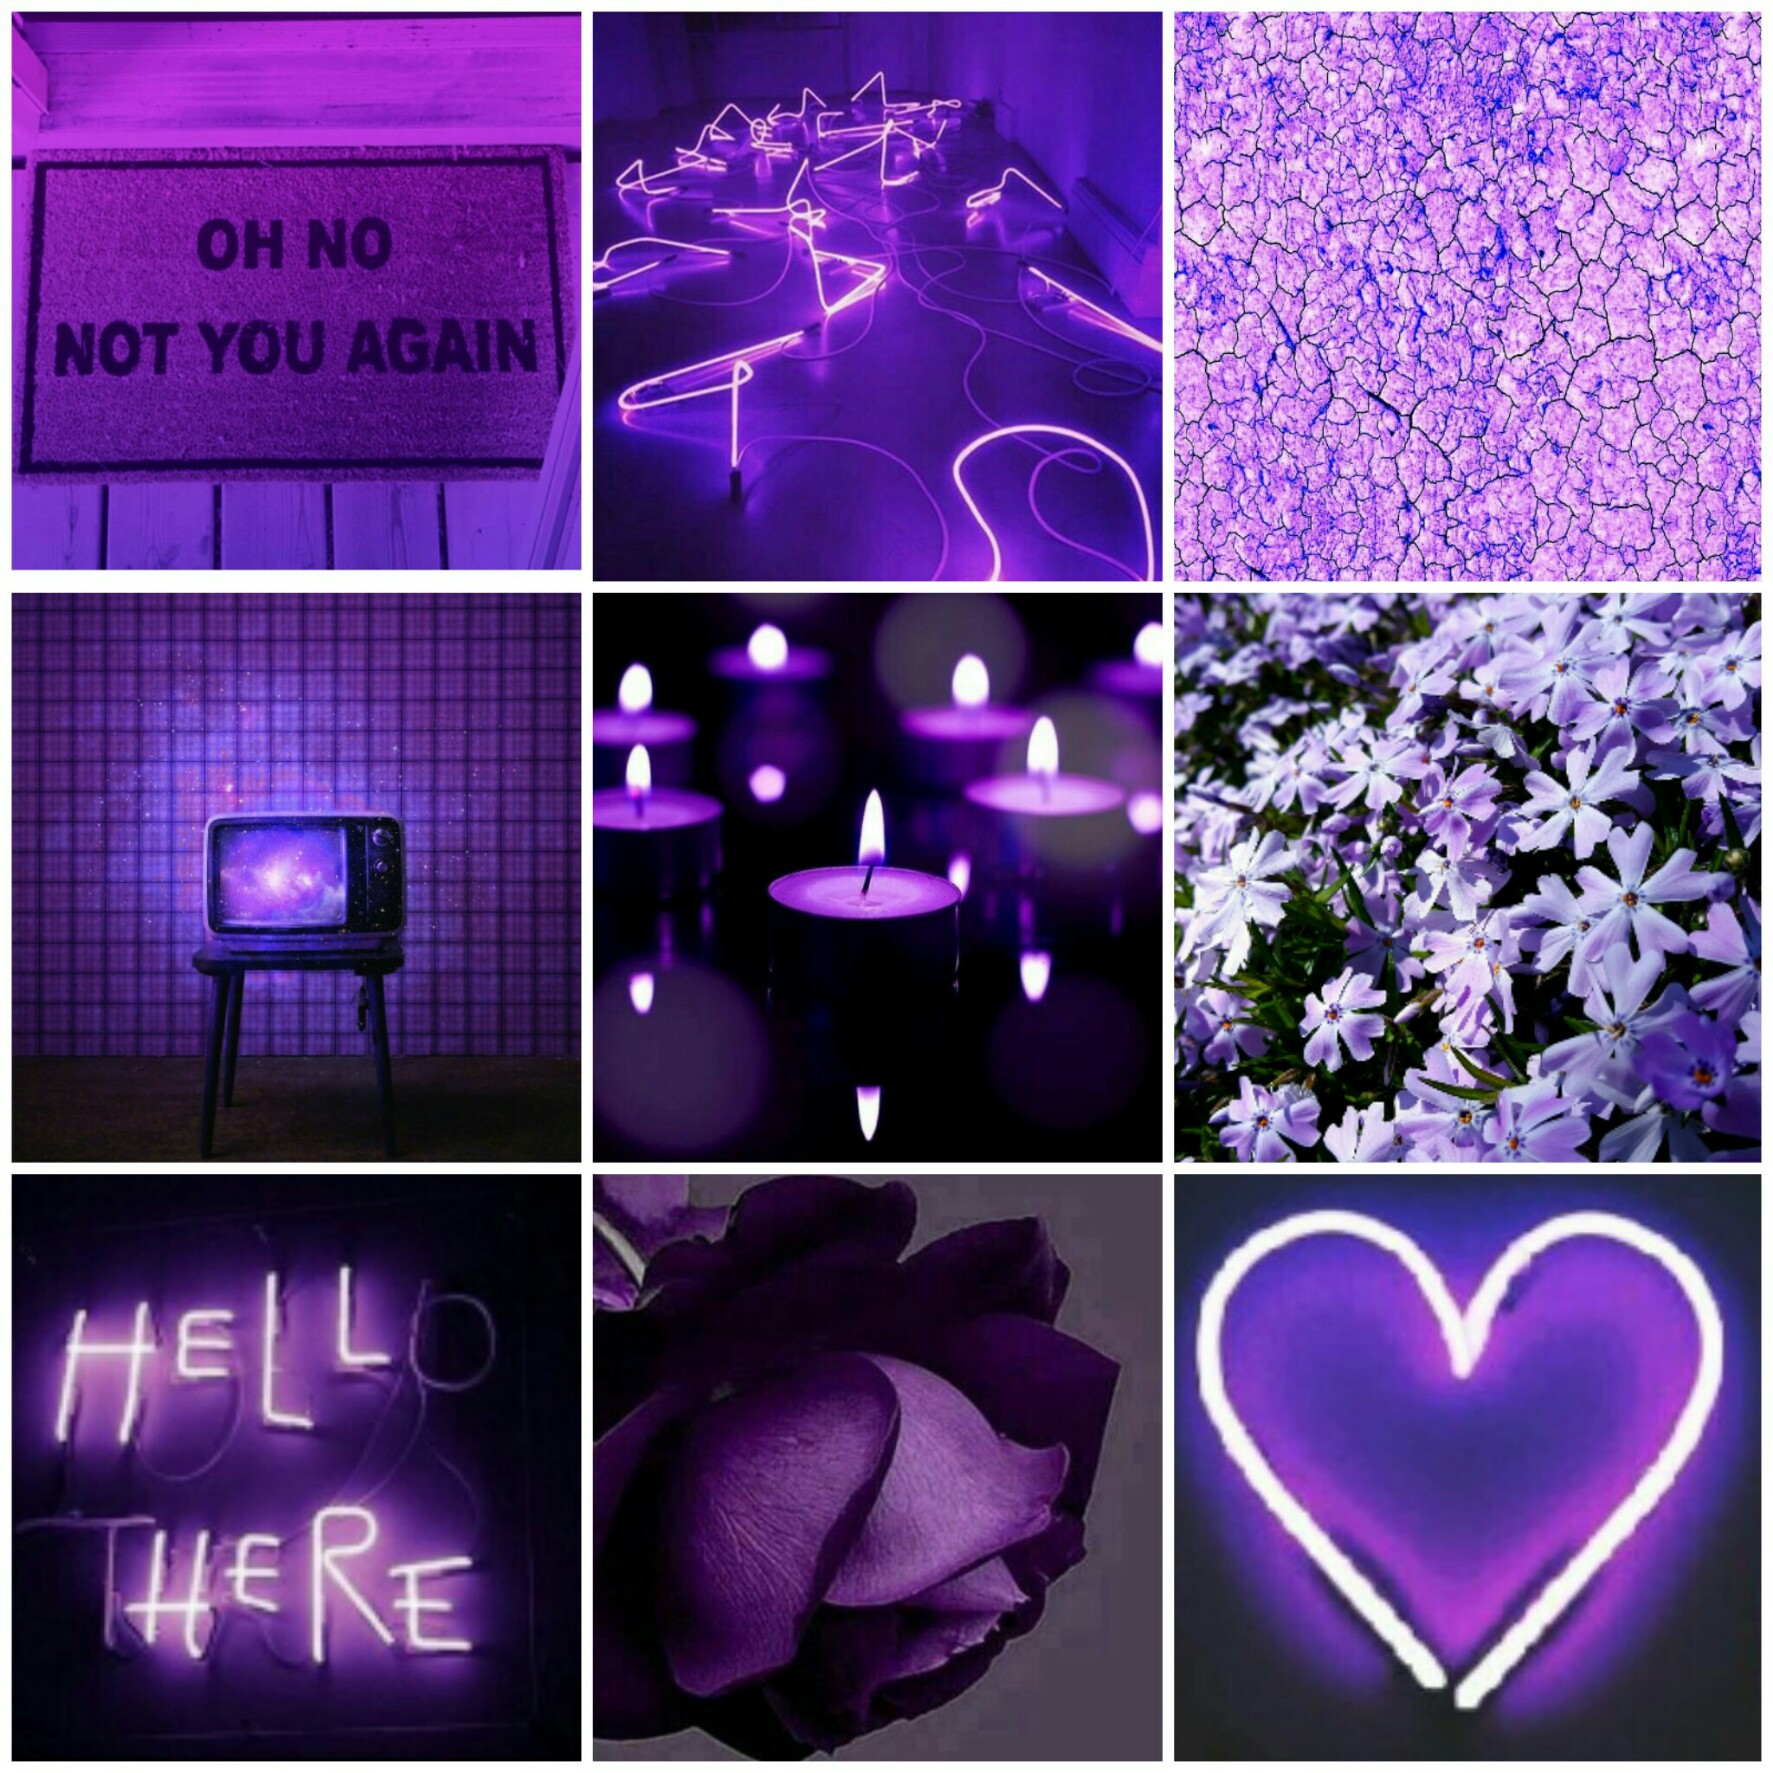 Purple Aesthetic : Pin by Keyana🐉 on Aesthetics | Aesthetic pictures ...